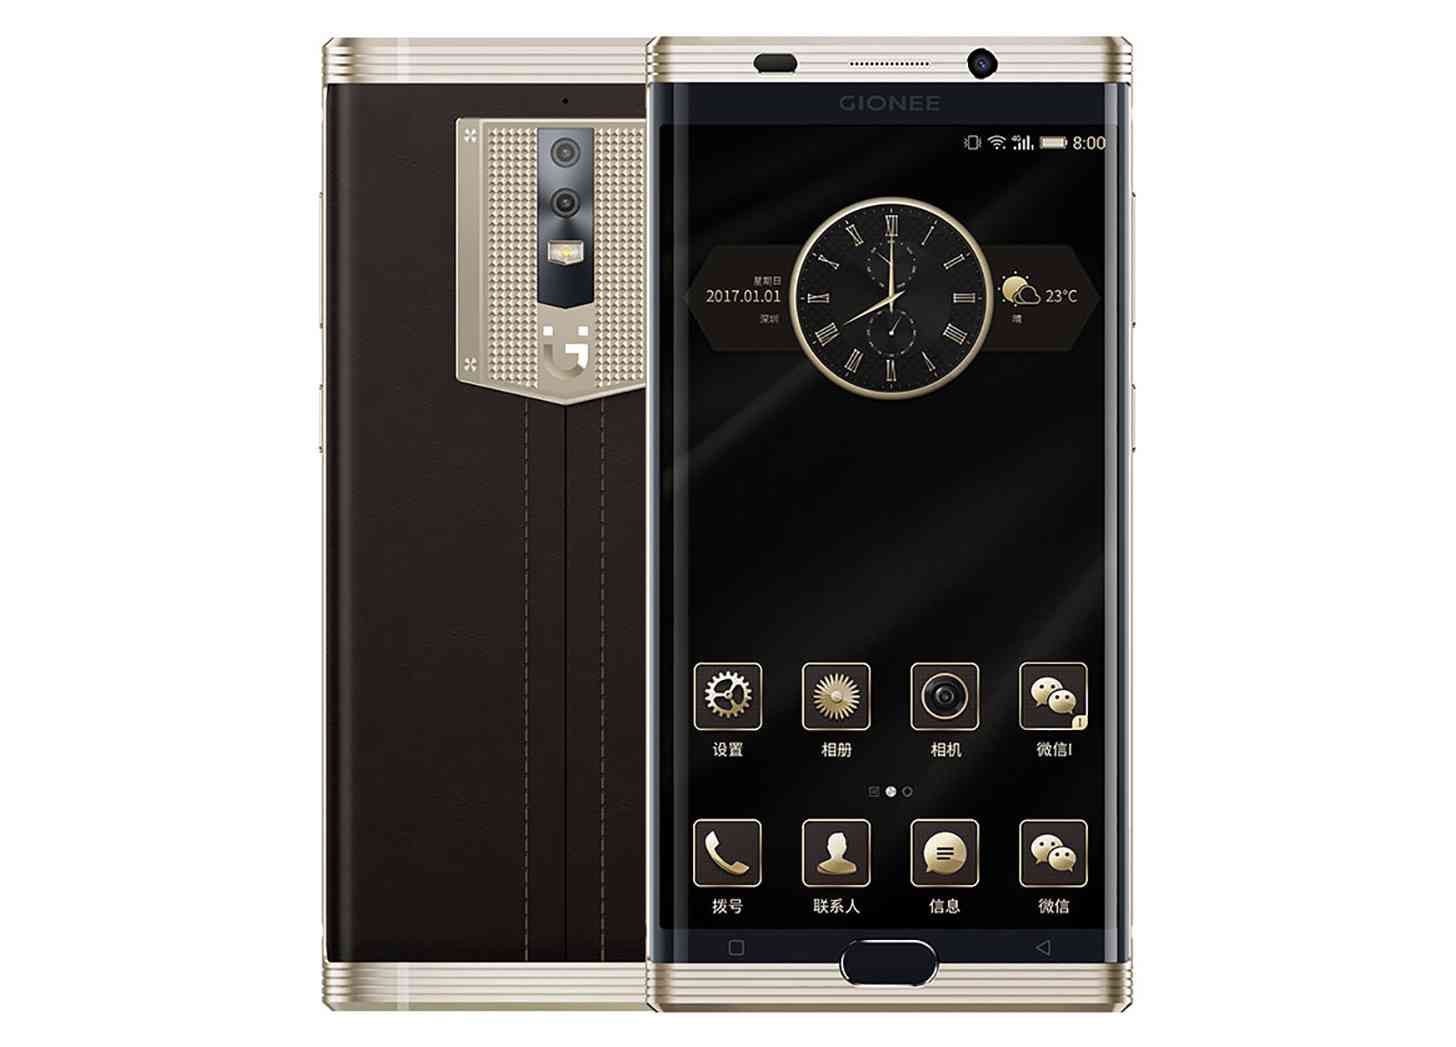 Gionee M2017 gold